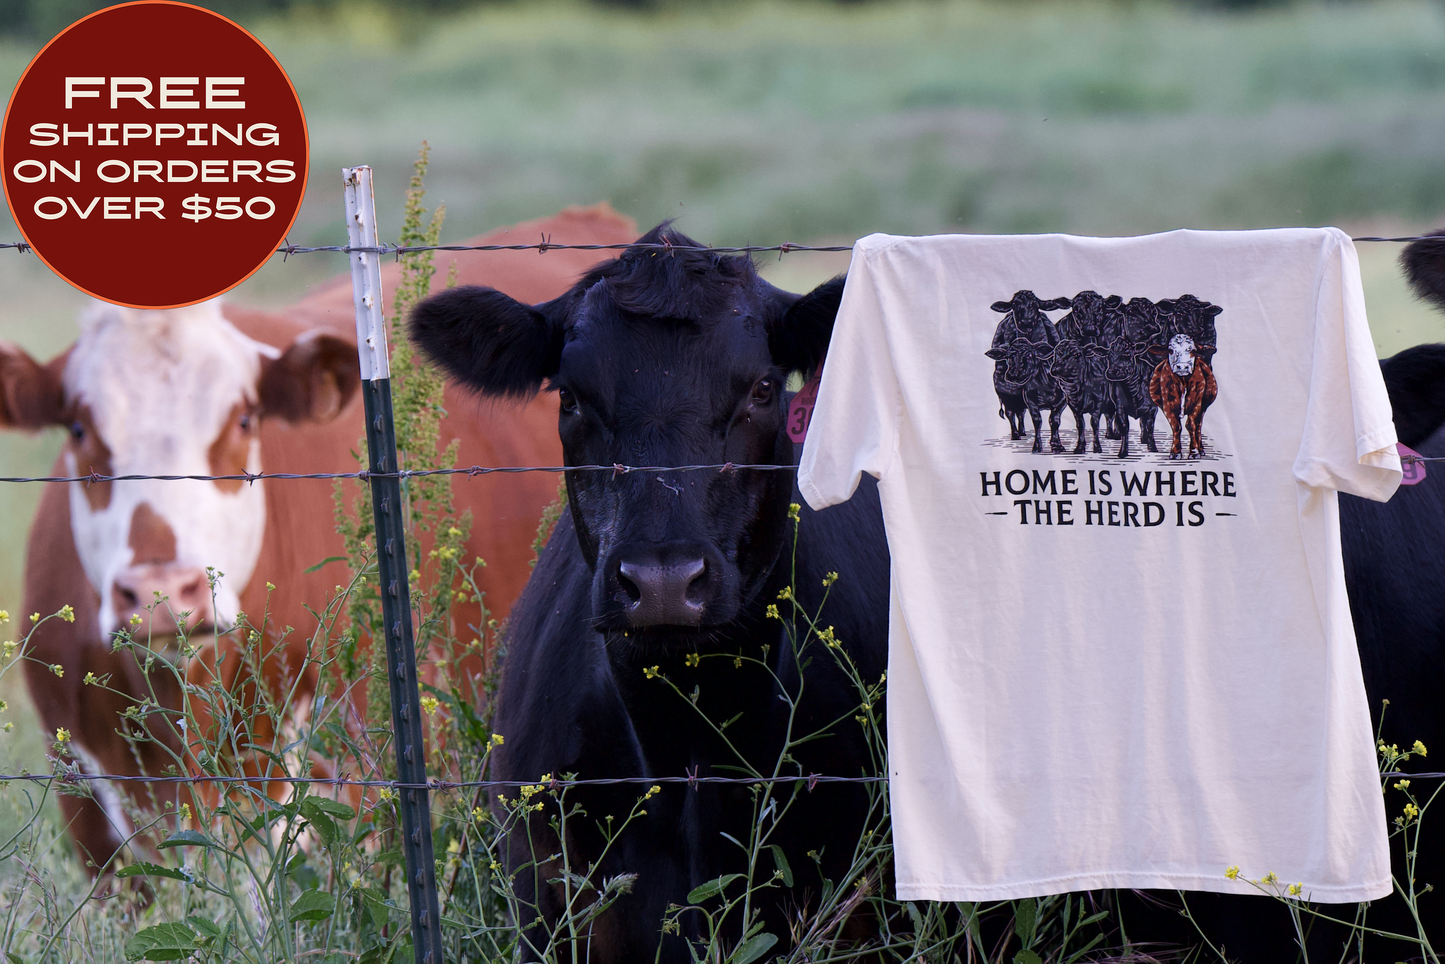 Home is Where the Herd Is Shirt